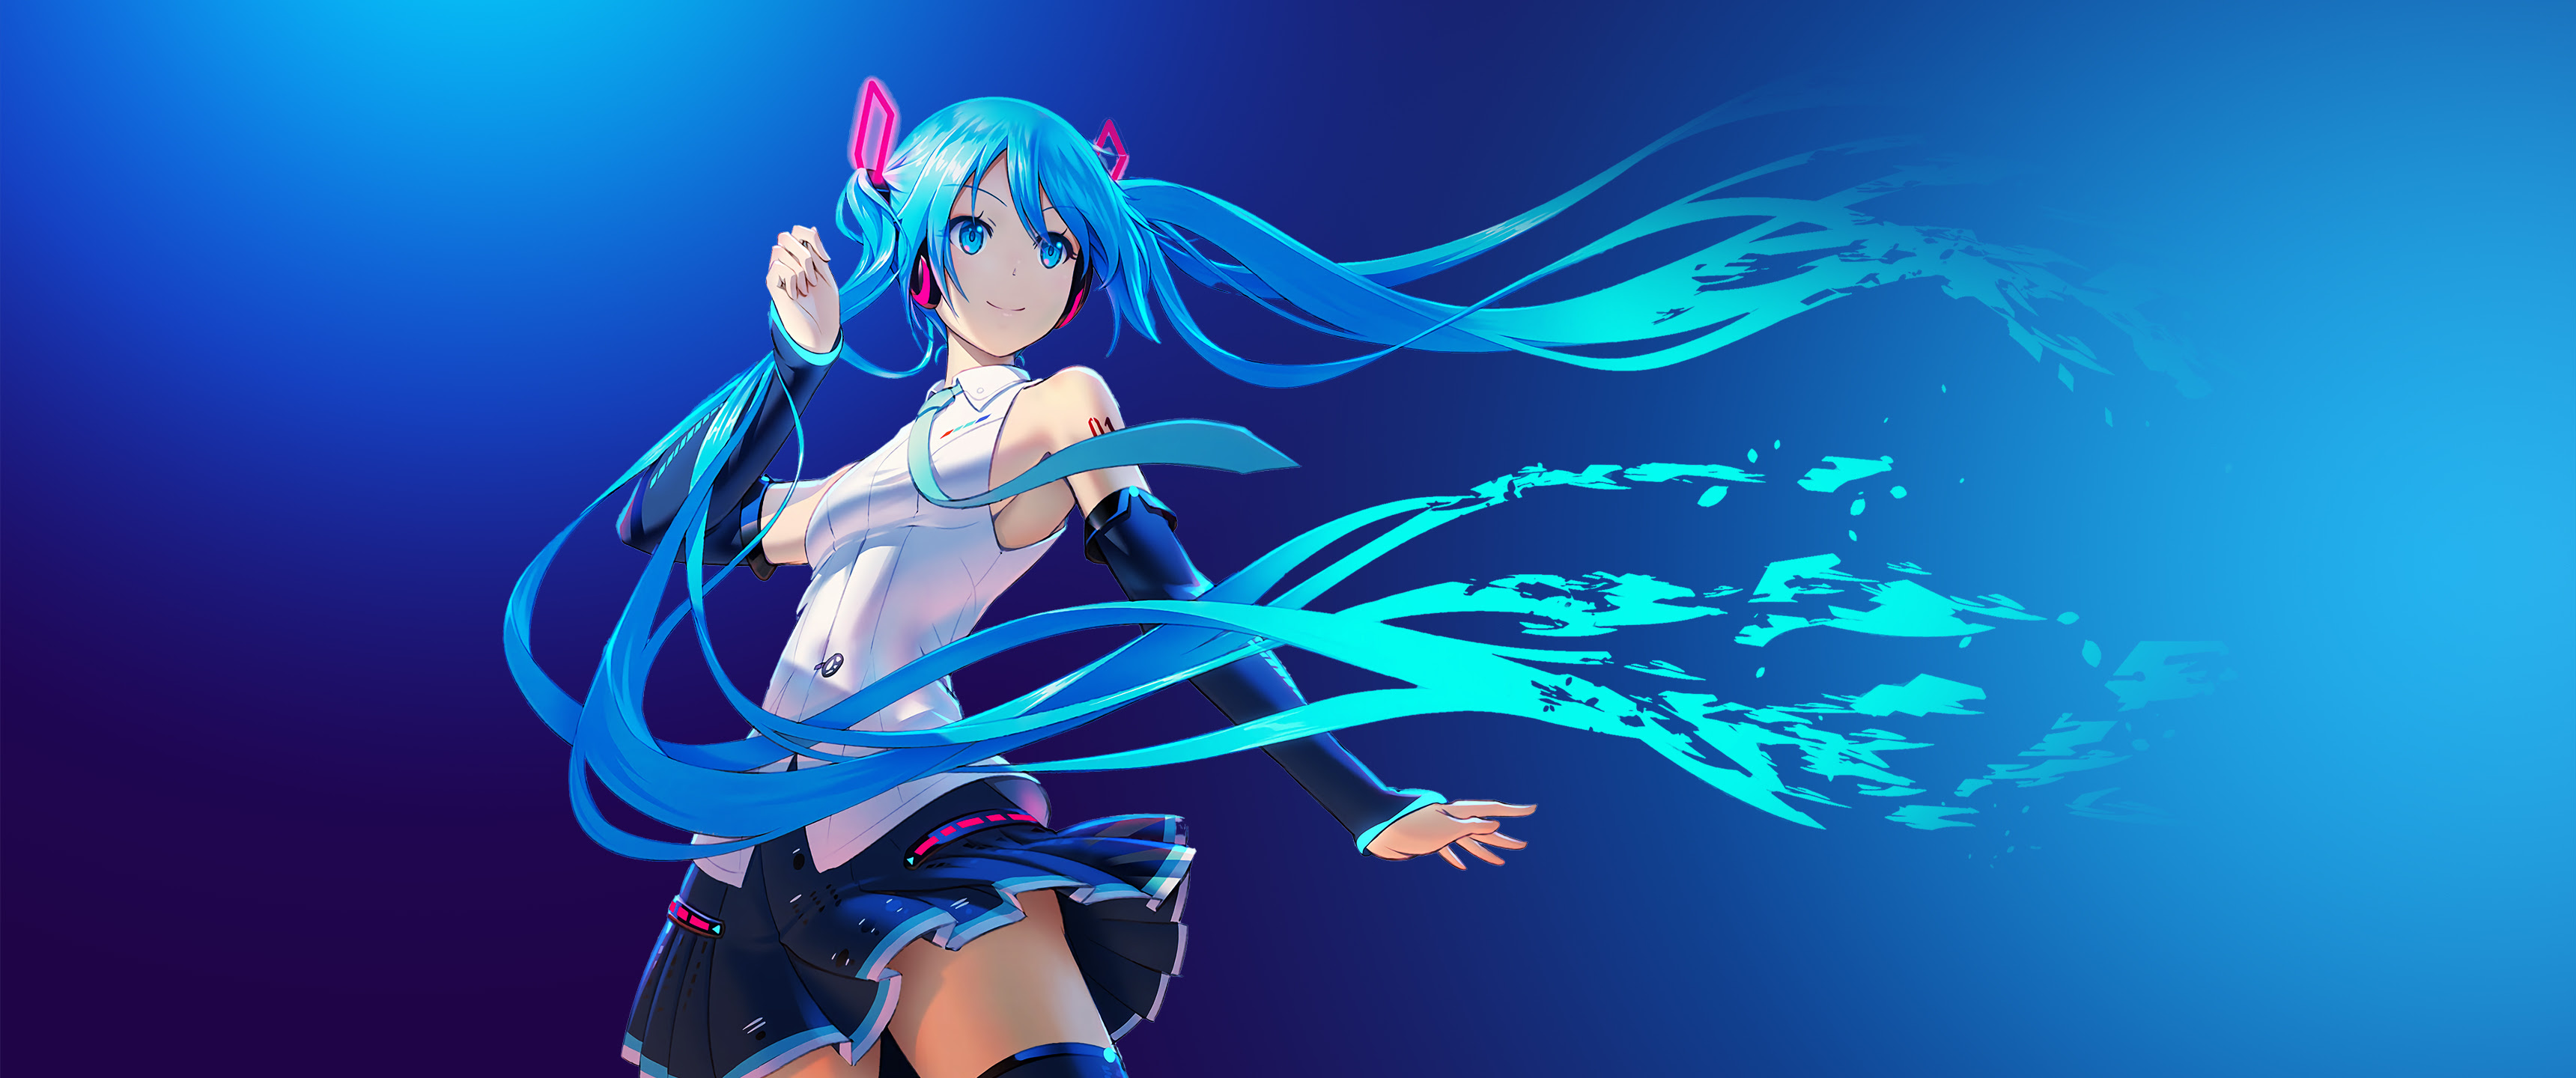 View 4K Resolution Anime Wallpaper 3440X1440 PNG